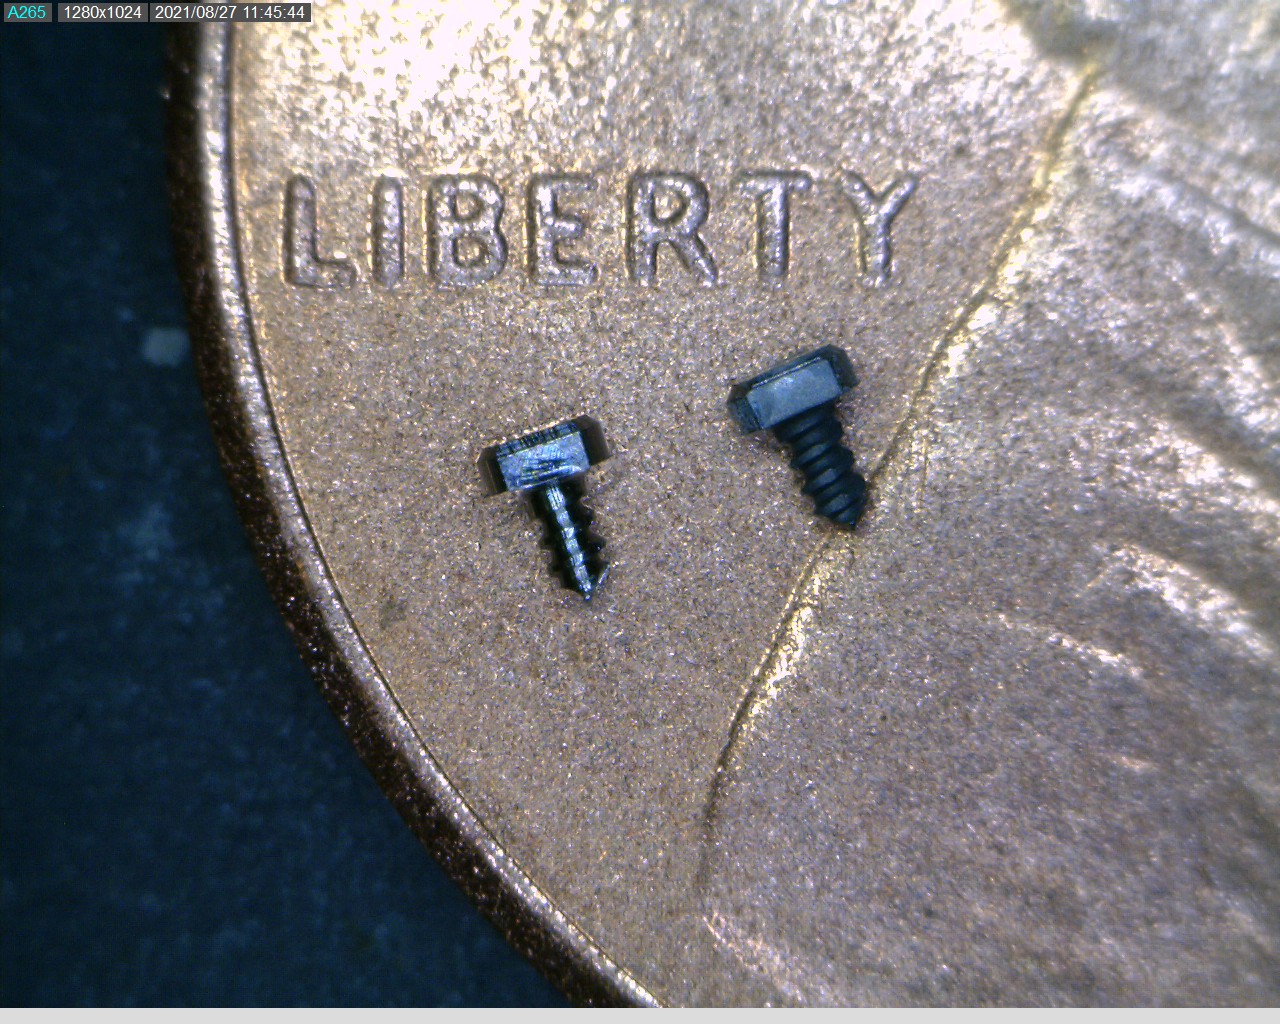 Screws on a penny - before and after